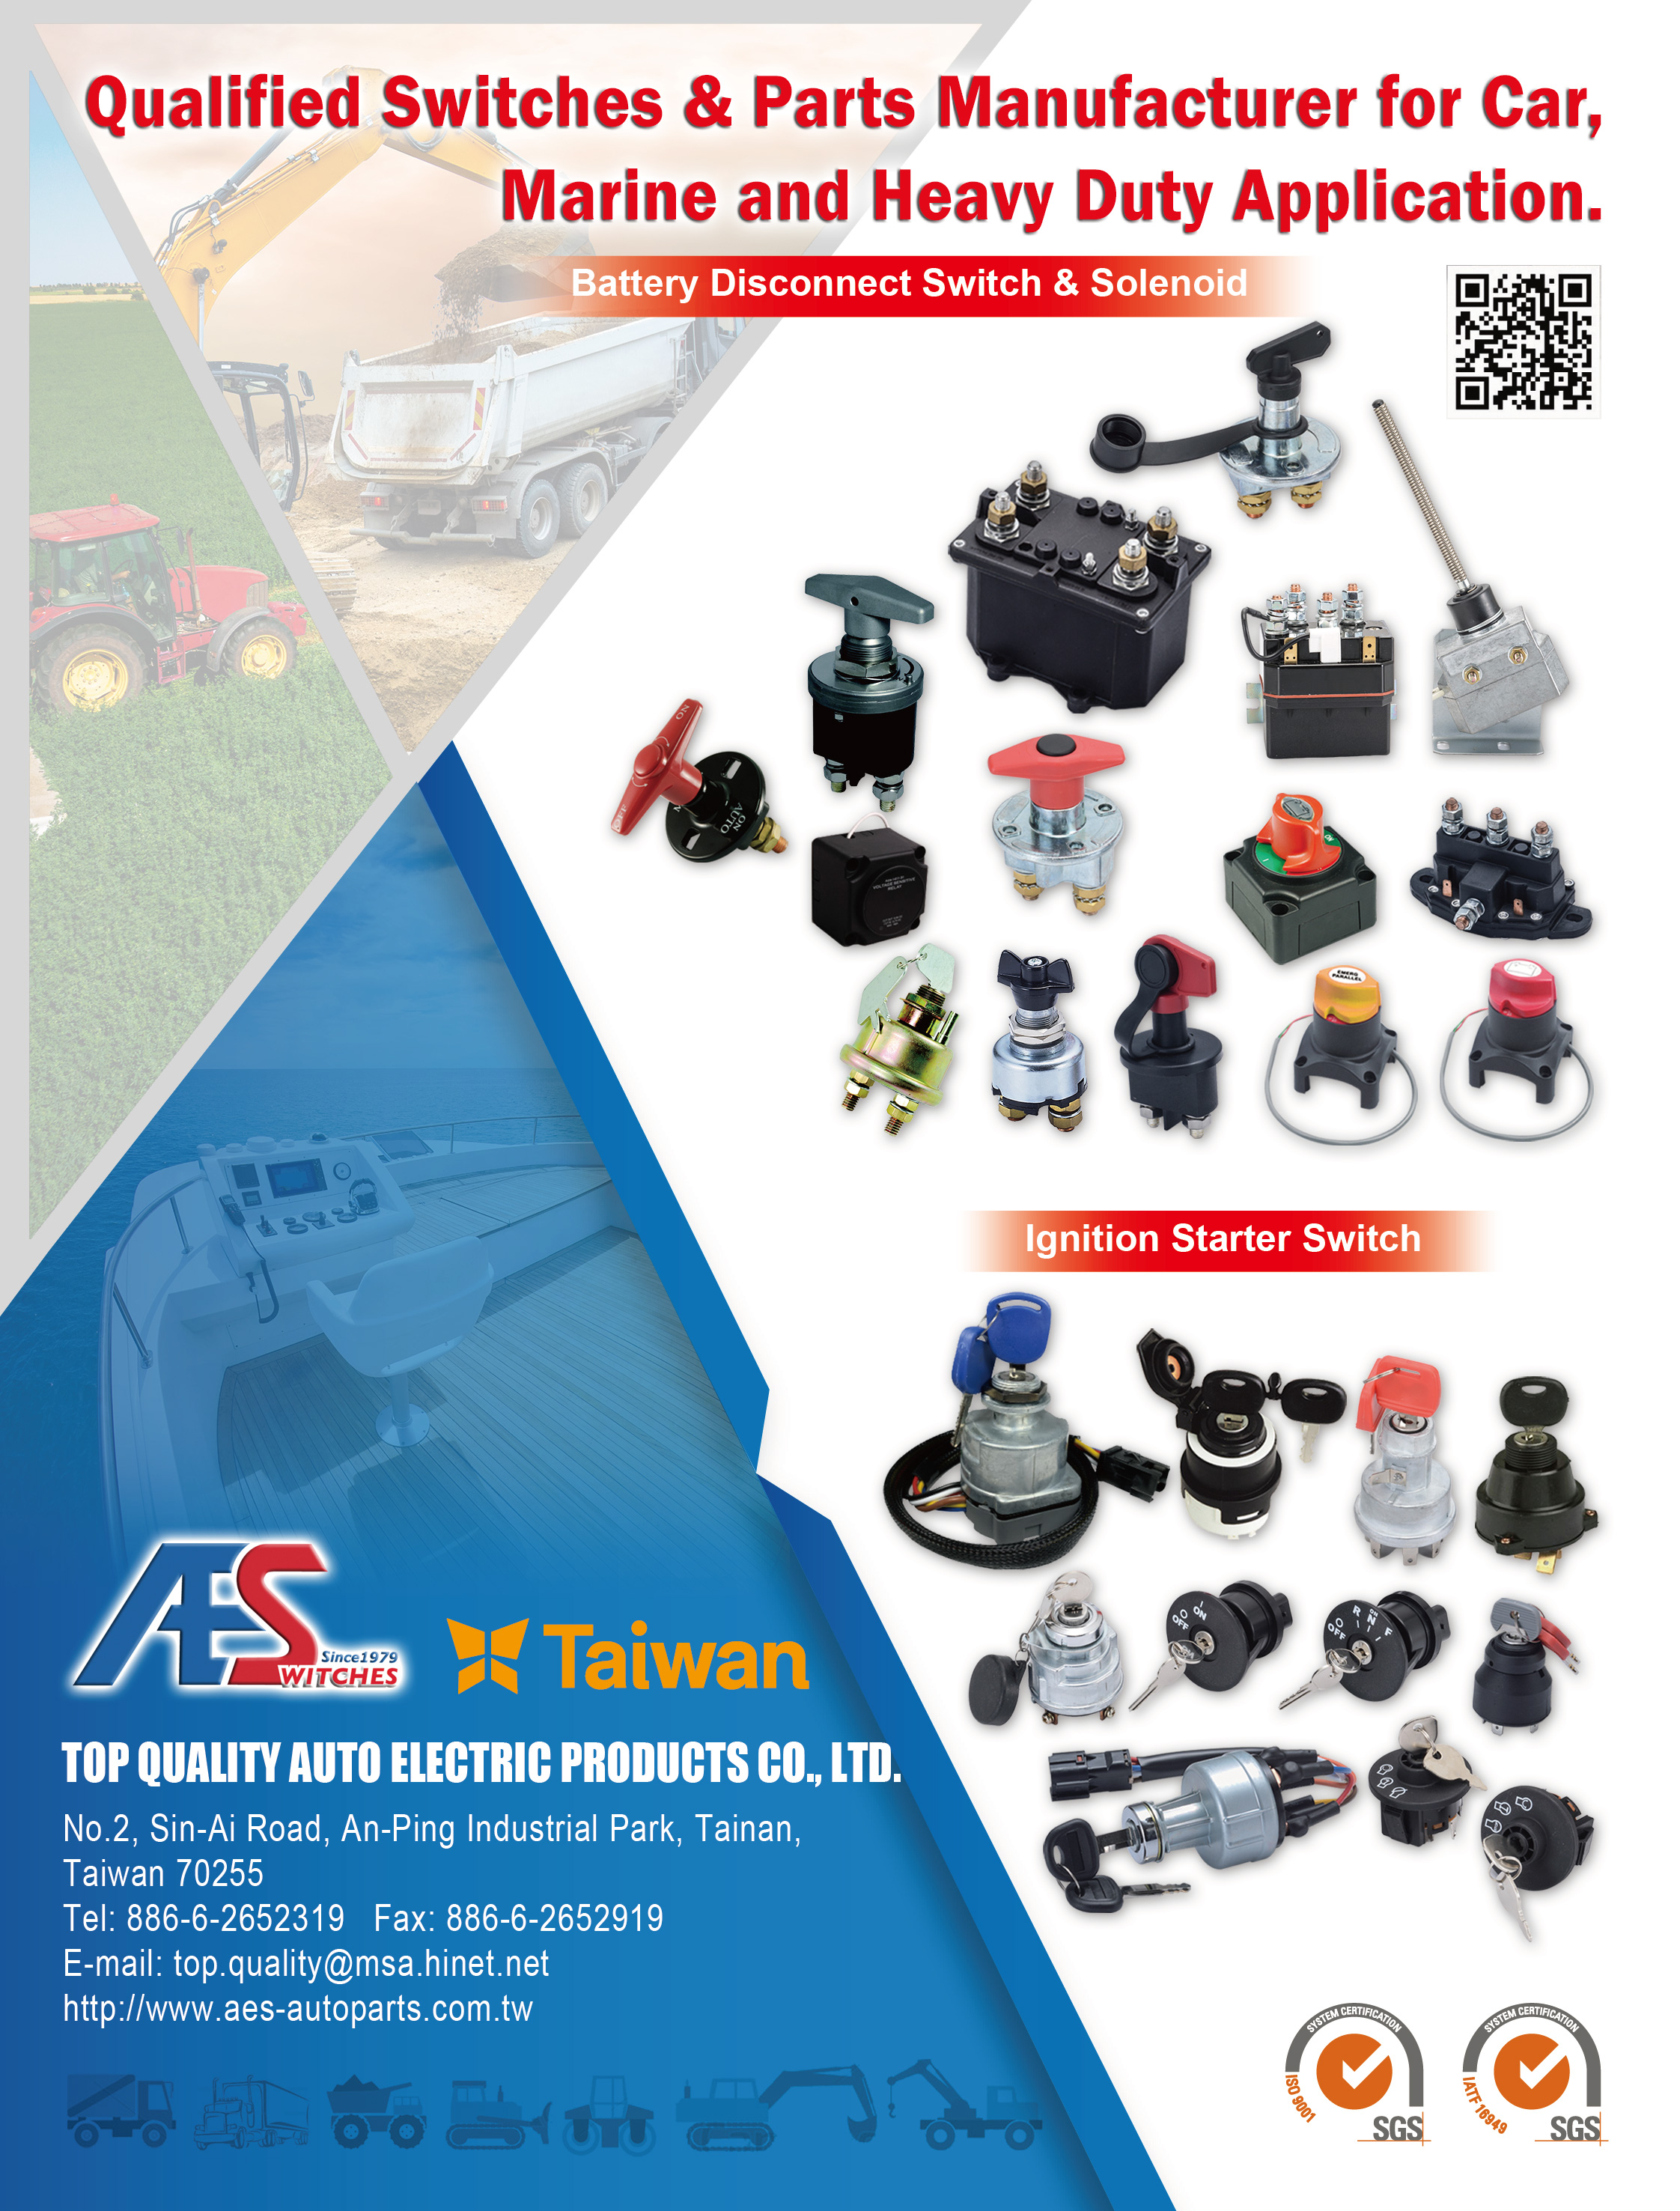 TOP QUALITY AUTO ELECTRIC PRODUCTS CO., LTD.